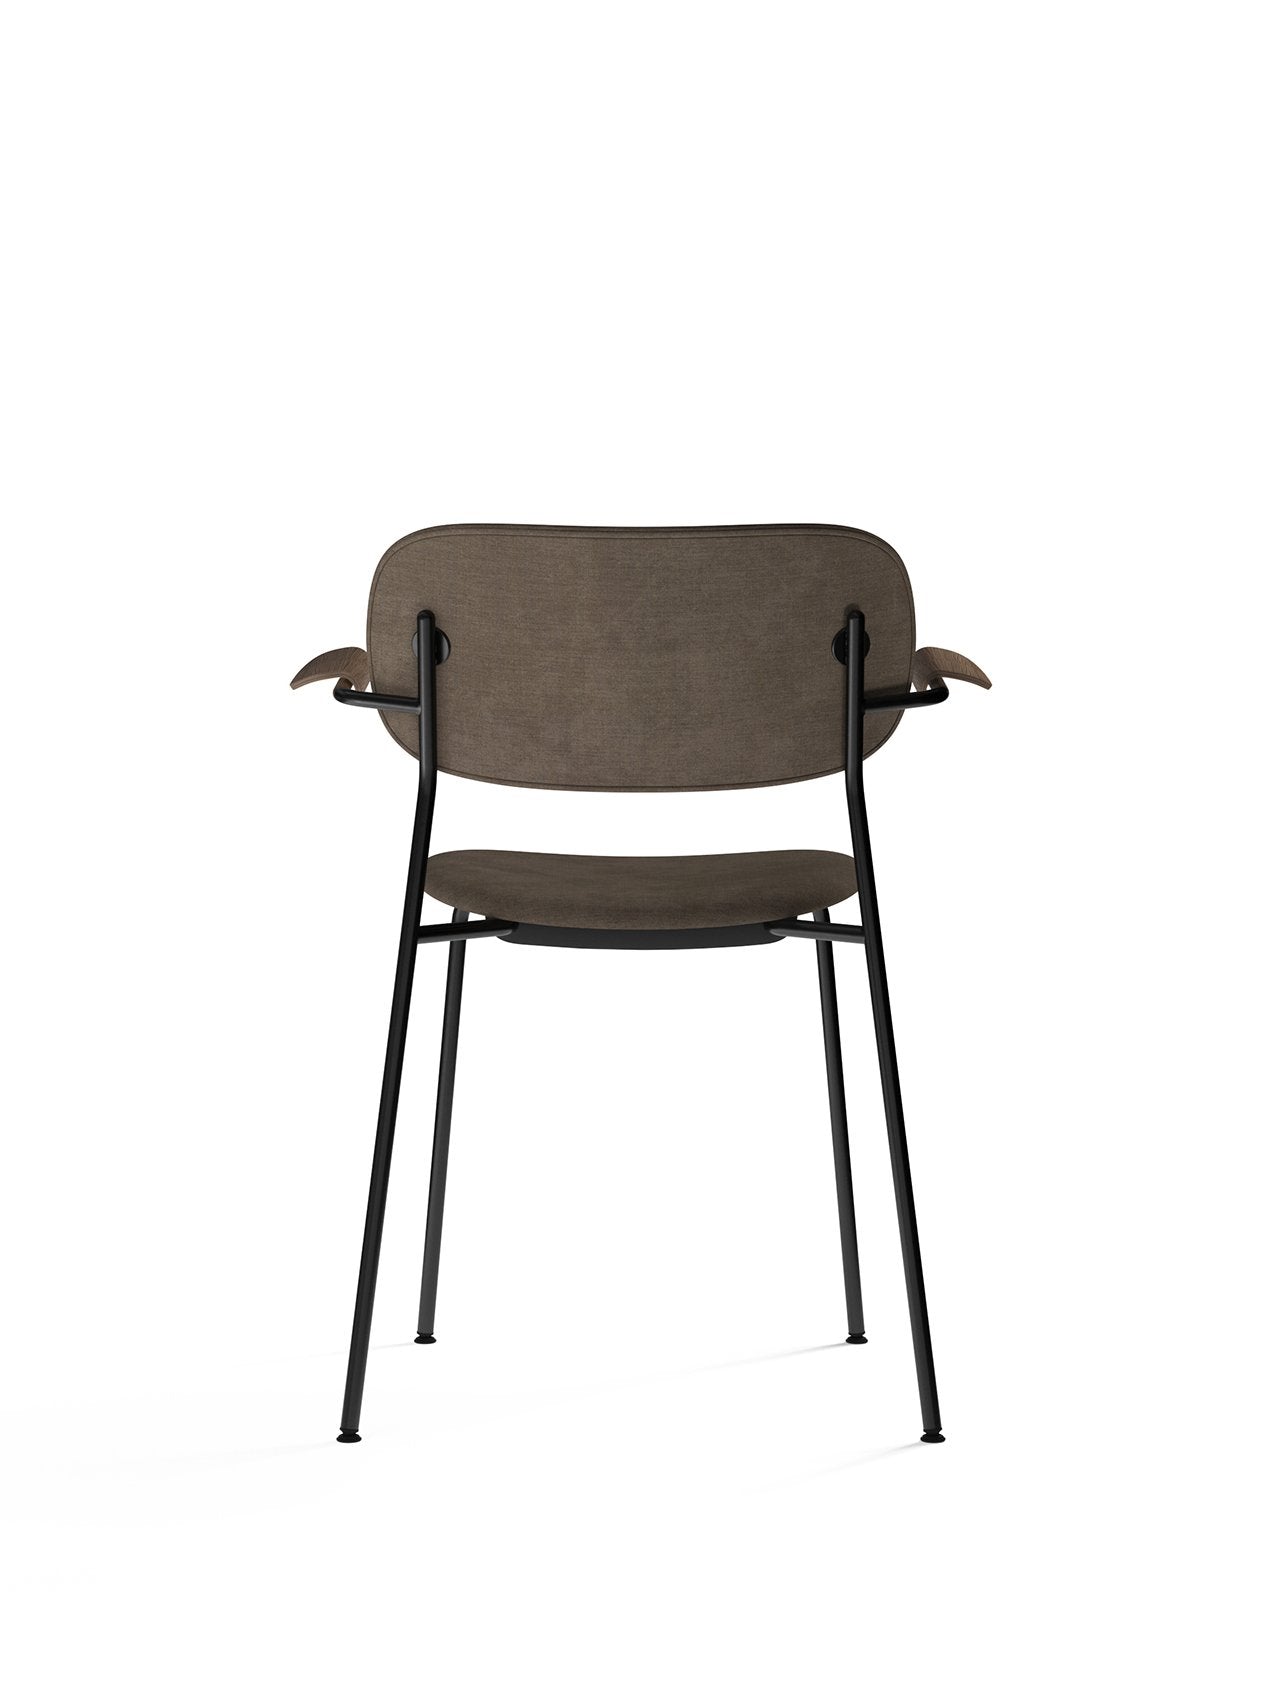 Co Chair, Fully Upholstered-Chair-Norm Architects-Dining Height (Seat 17.7in H)/Black Steel without Armrest-022/Moss-menu-minimalist-modern-danish-design-home-decor